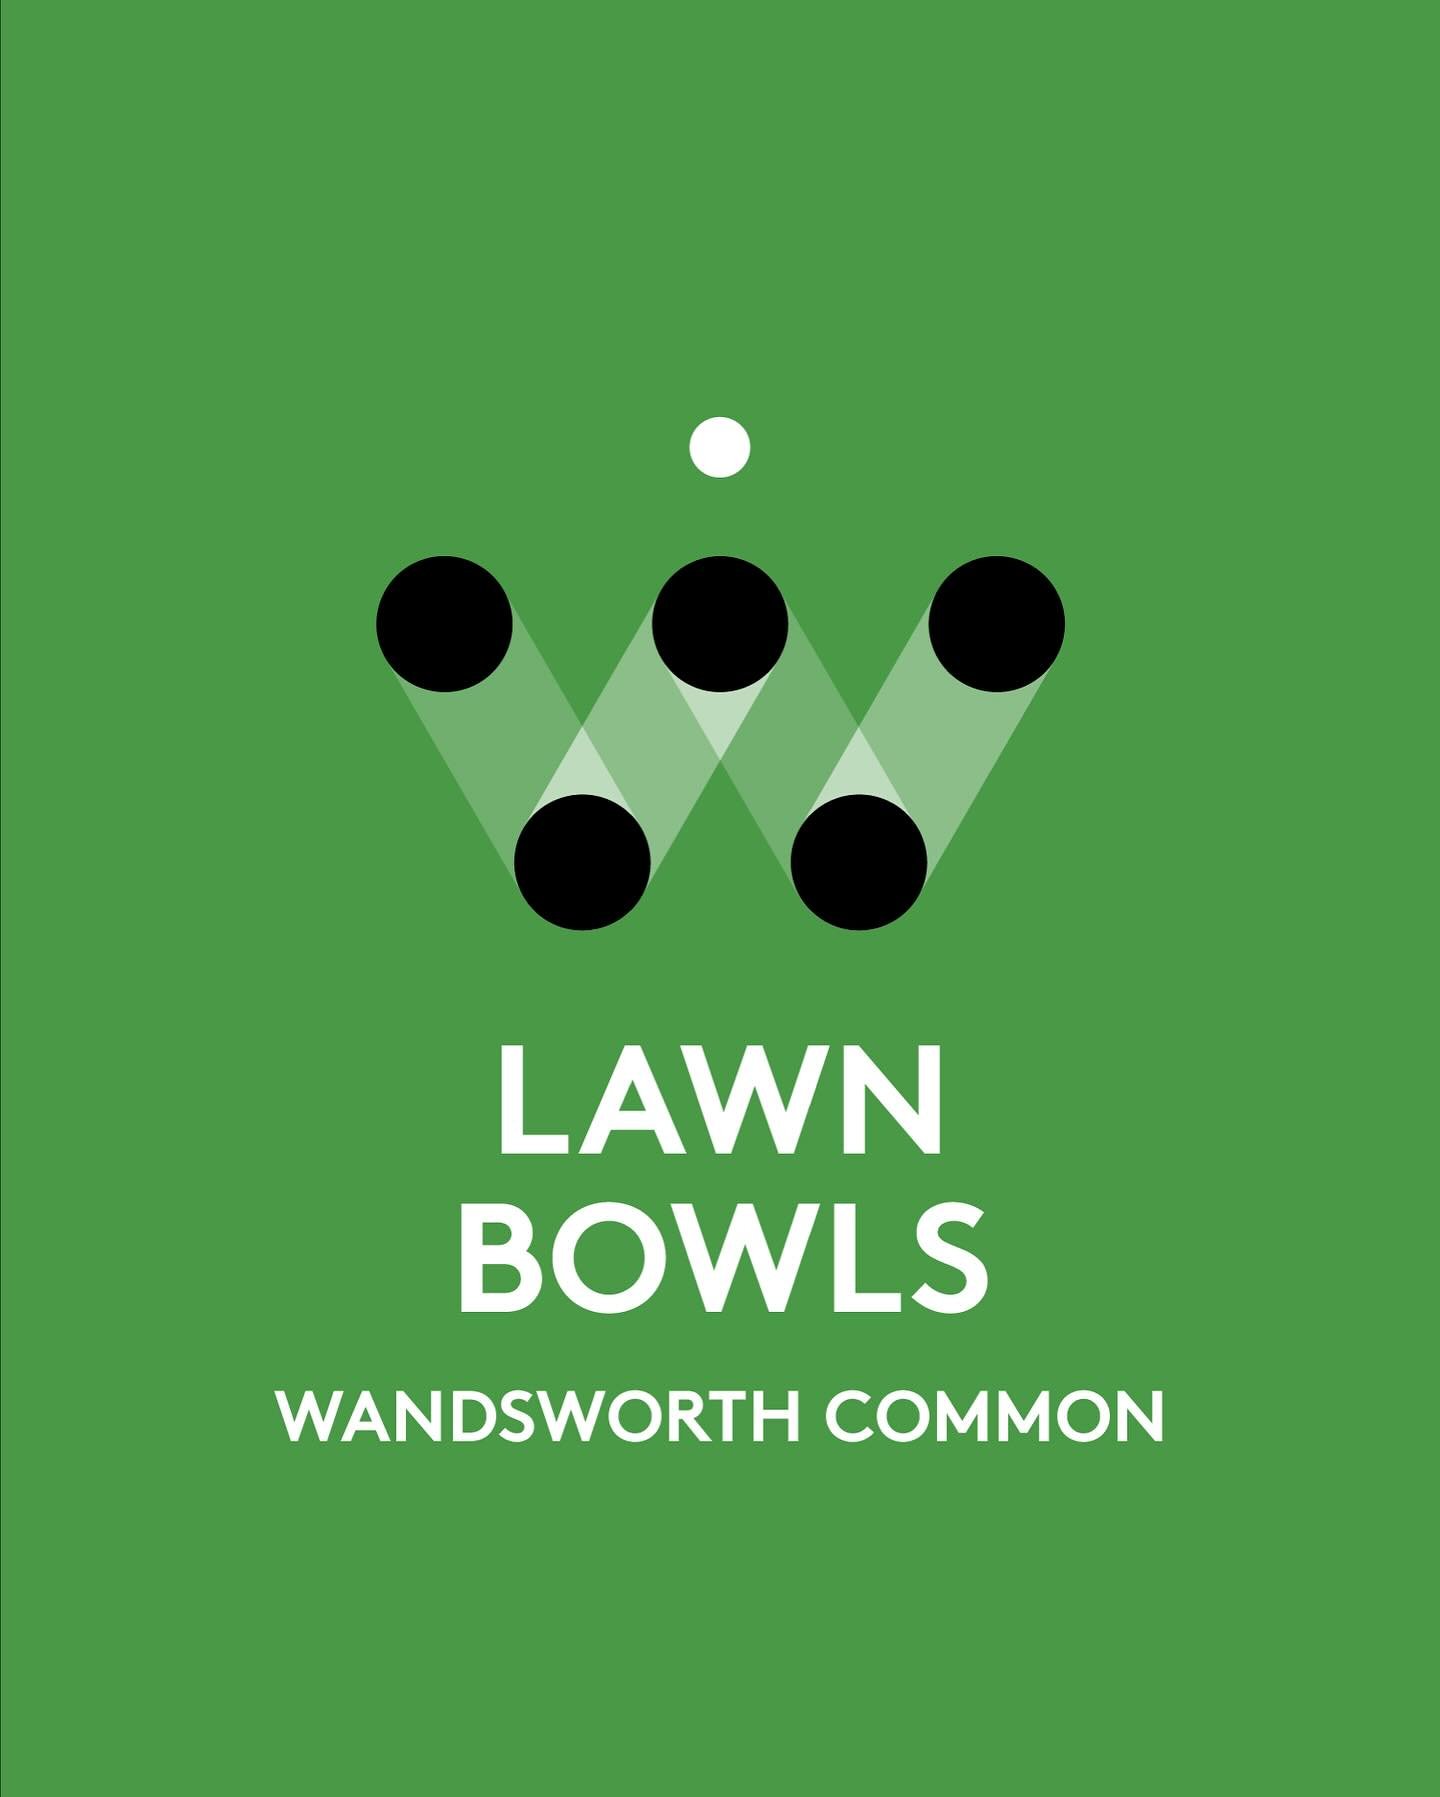 Join us at the #wandsworthcommon bowling green tomorrow at 5.30pm for the first of our regular Friday evening social bowls sessions.
🎱🥳

No experience required. Basic tuition provided, followed by friendly games. &pound;5 to include 1st drink. Flat